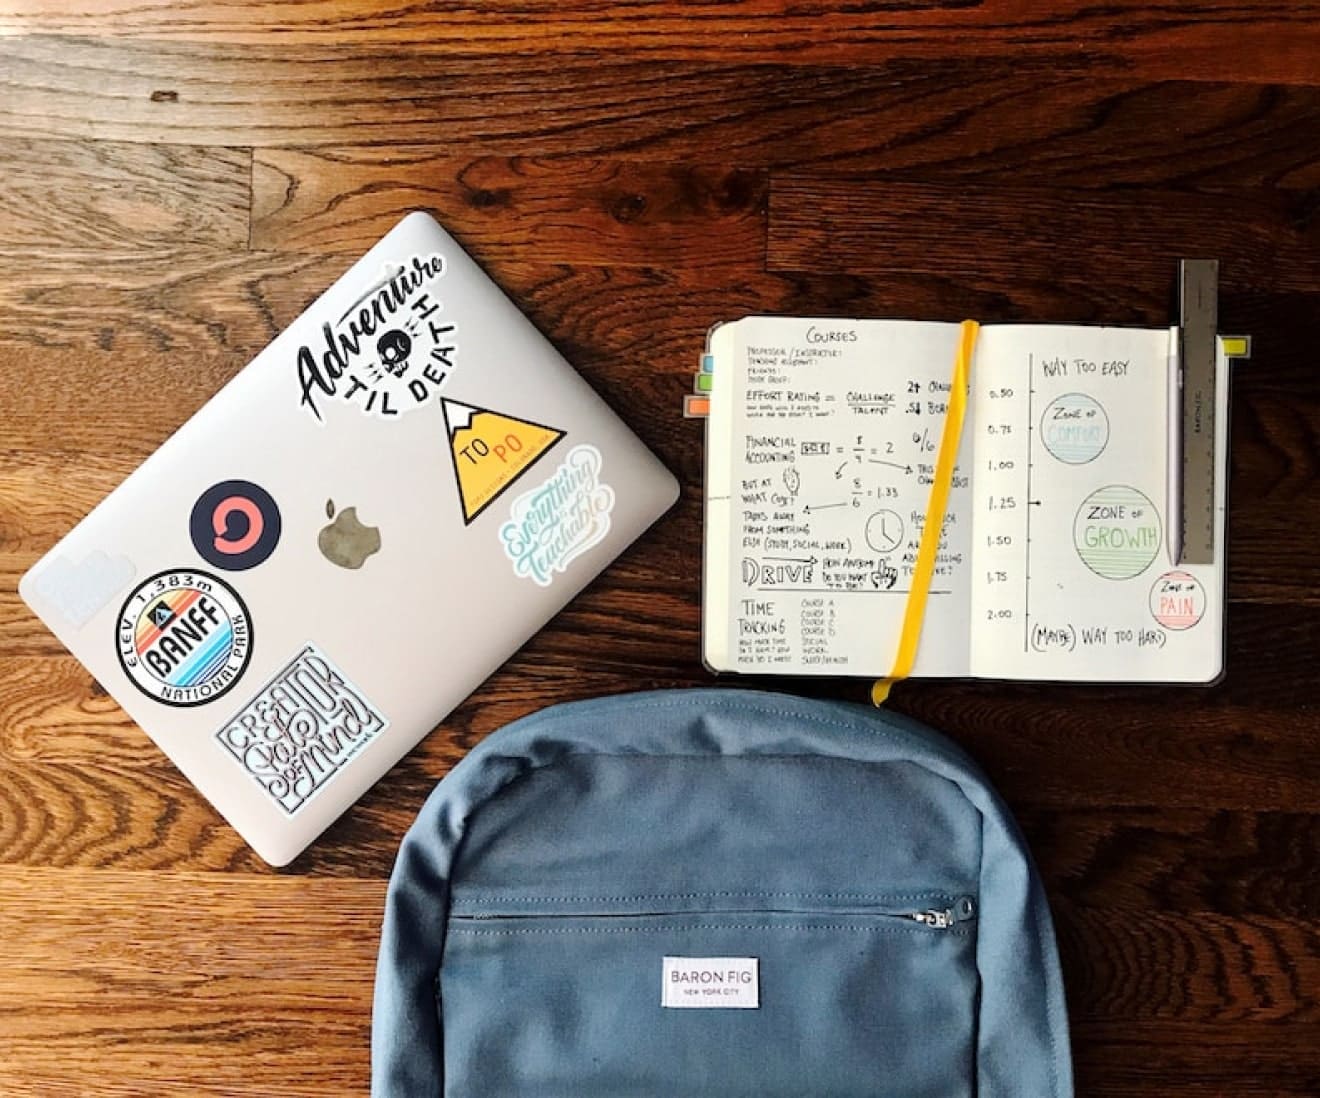 Table with backpack, notebook, and laptop - Jitterbit University - Harmony Support